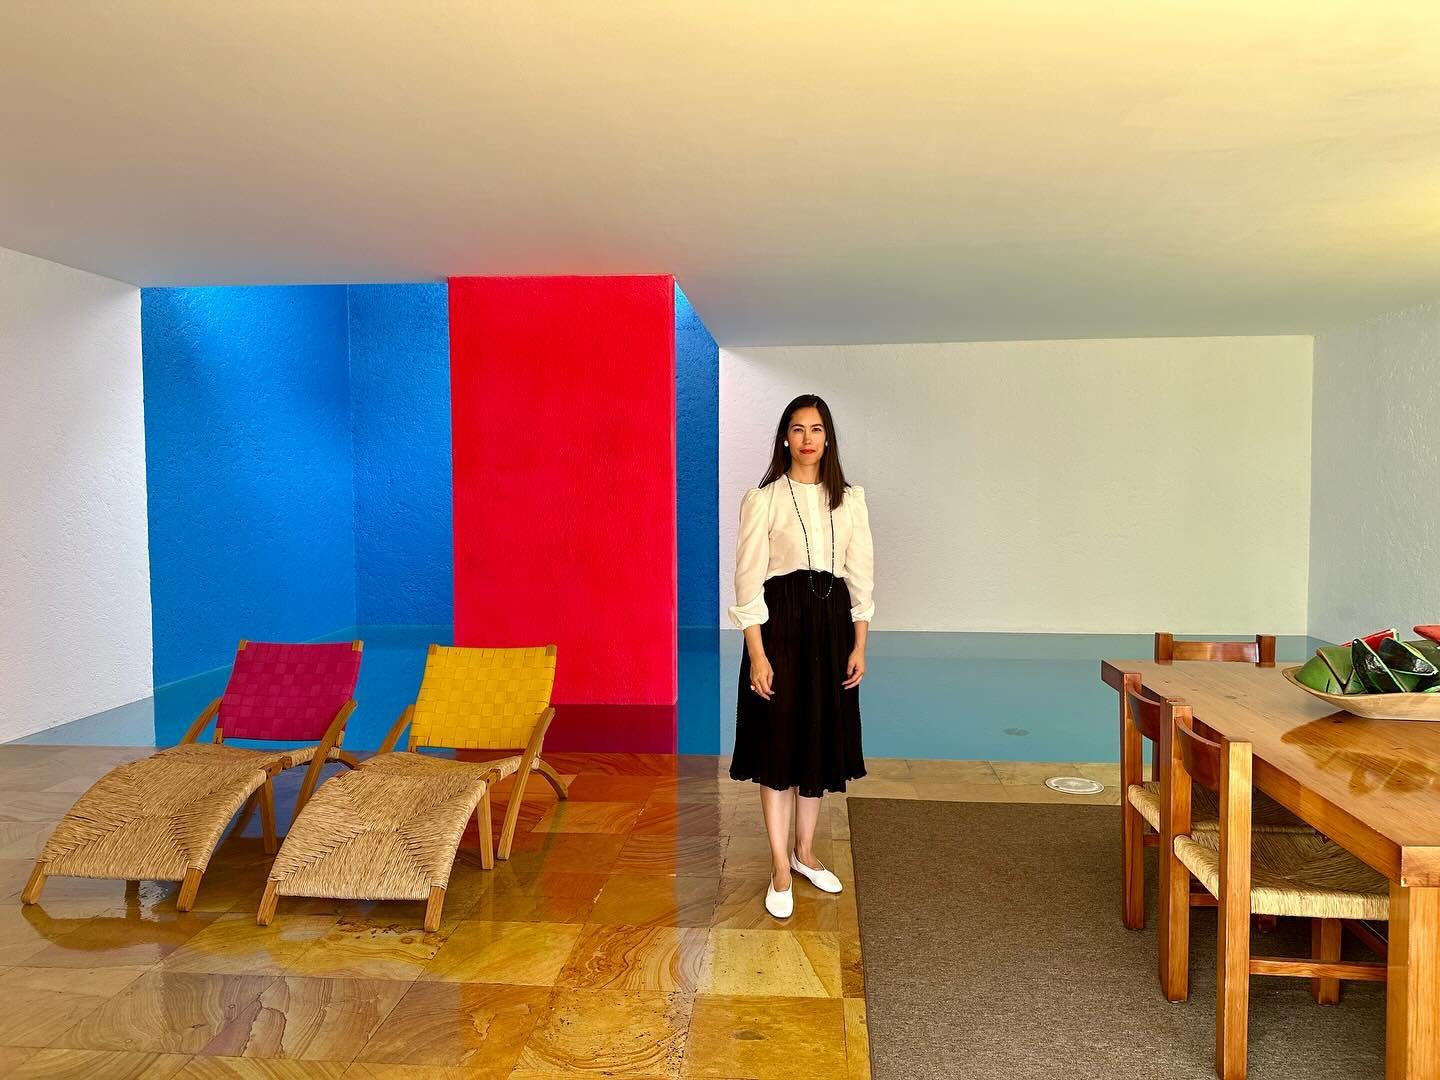 Thinking back to my whirlwind trip to Mexico City to do research for an article I am working on for VERANDA magazine featuring my favorite Art &amp; Culture discoveries.

I was lucky enough to visit Casa Gilardi, the last home designed by the great M